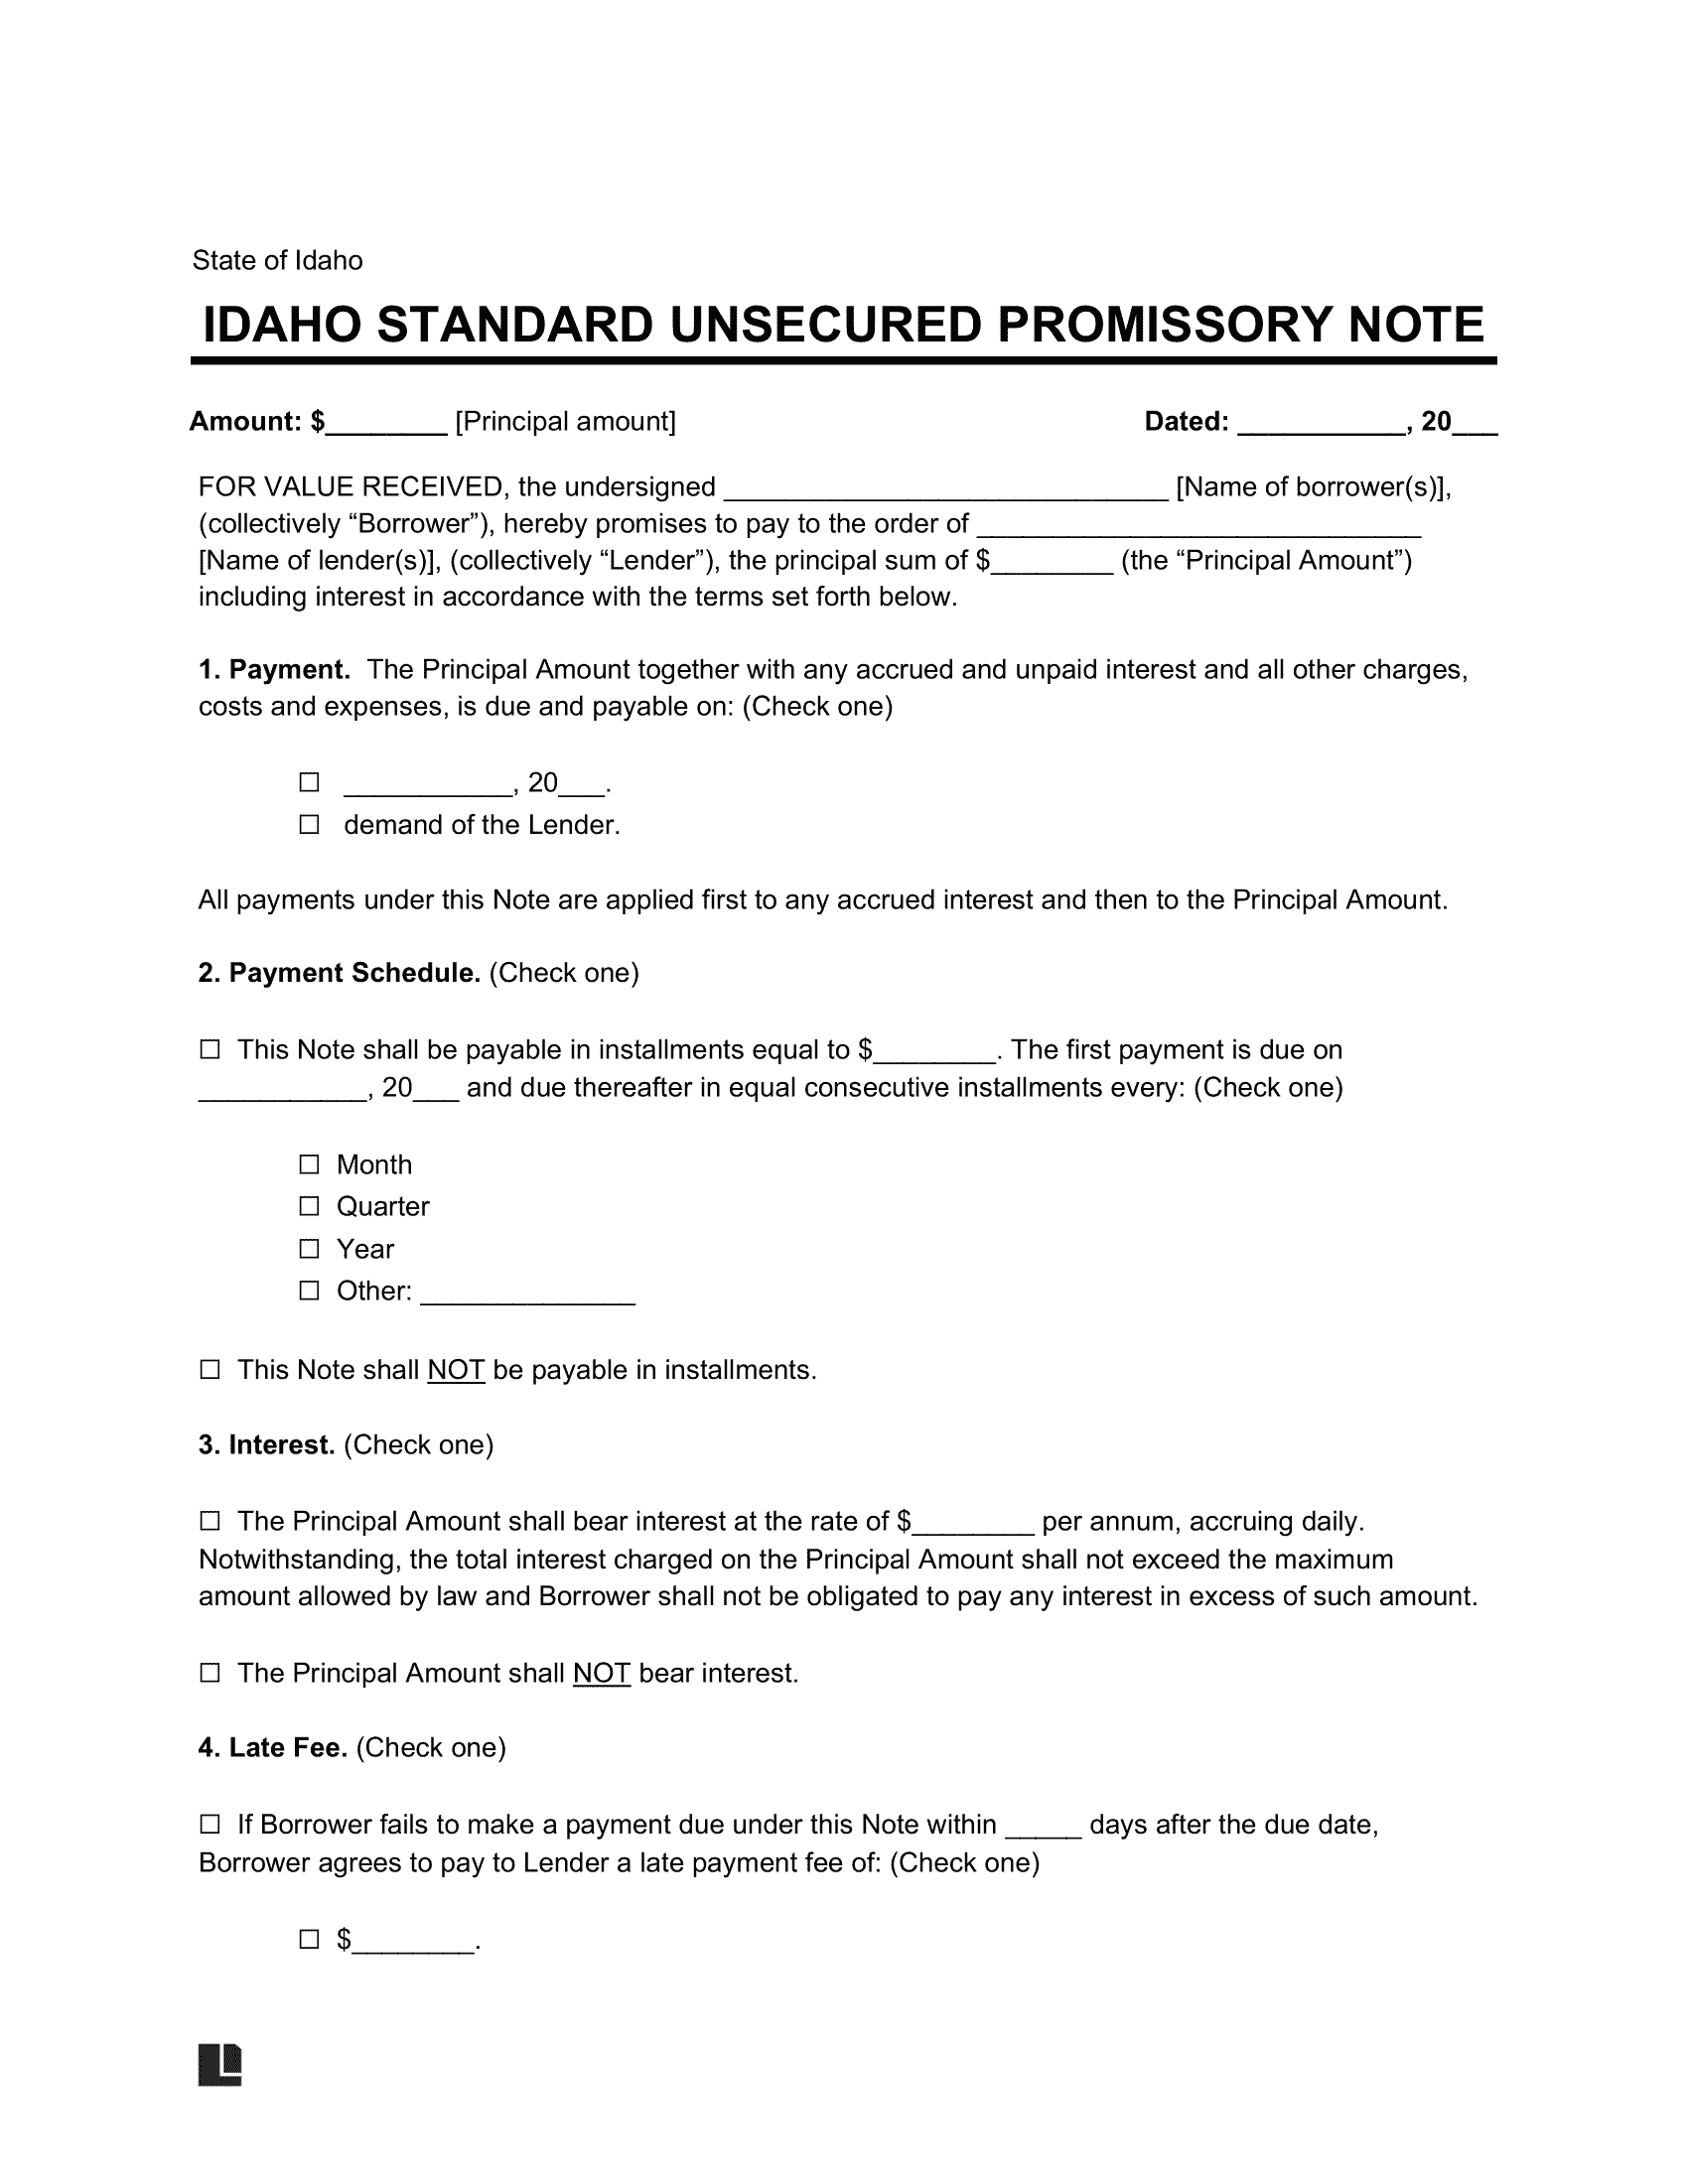 Free Idaho Unsecured Promissory Note Template PDF Word